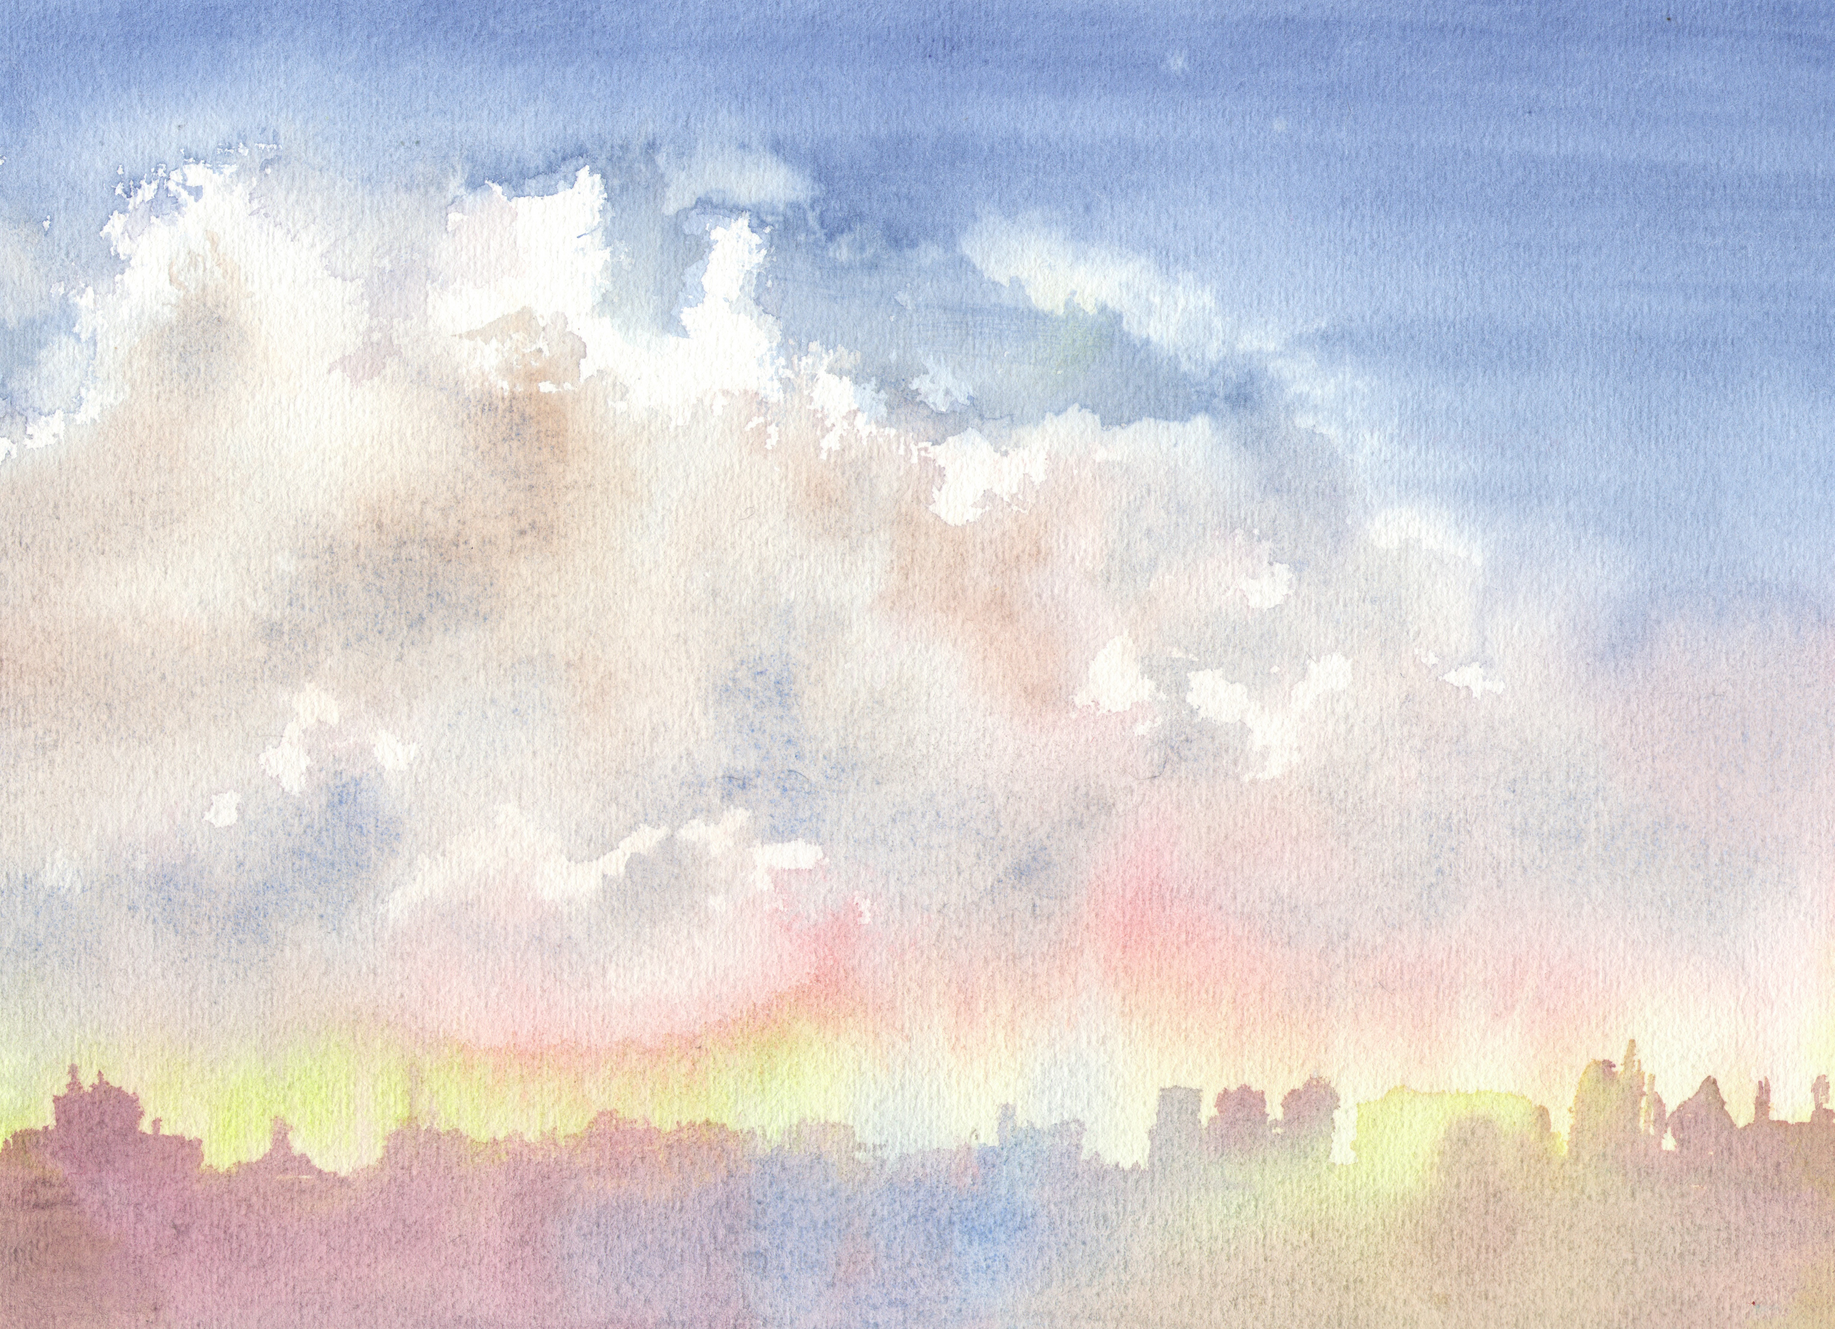 The Sky with Clouds over the City. Morning. Abstract Blue Watercolor Background Divorce. Watercolor Illustration